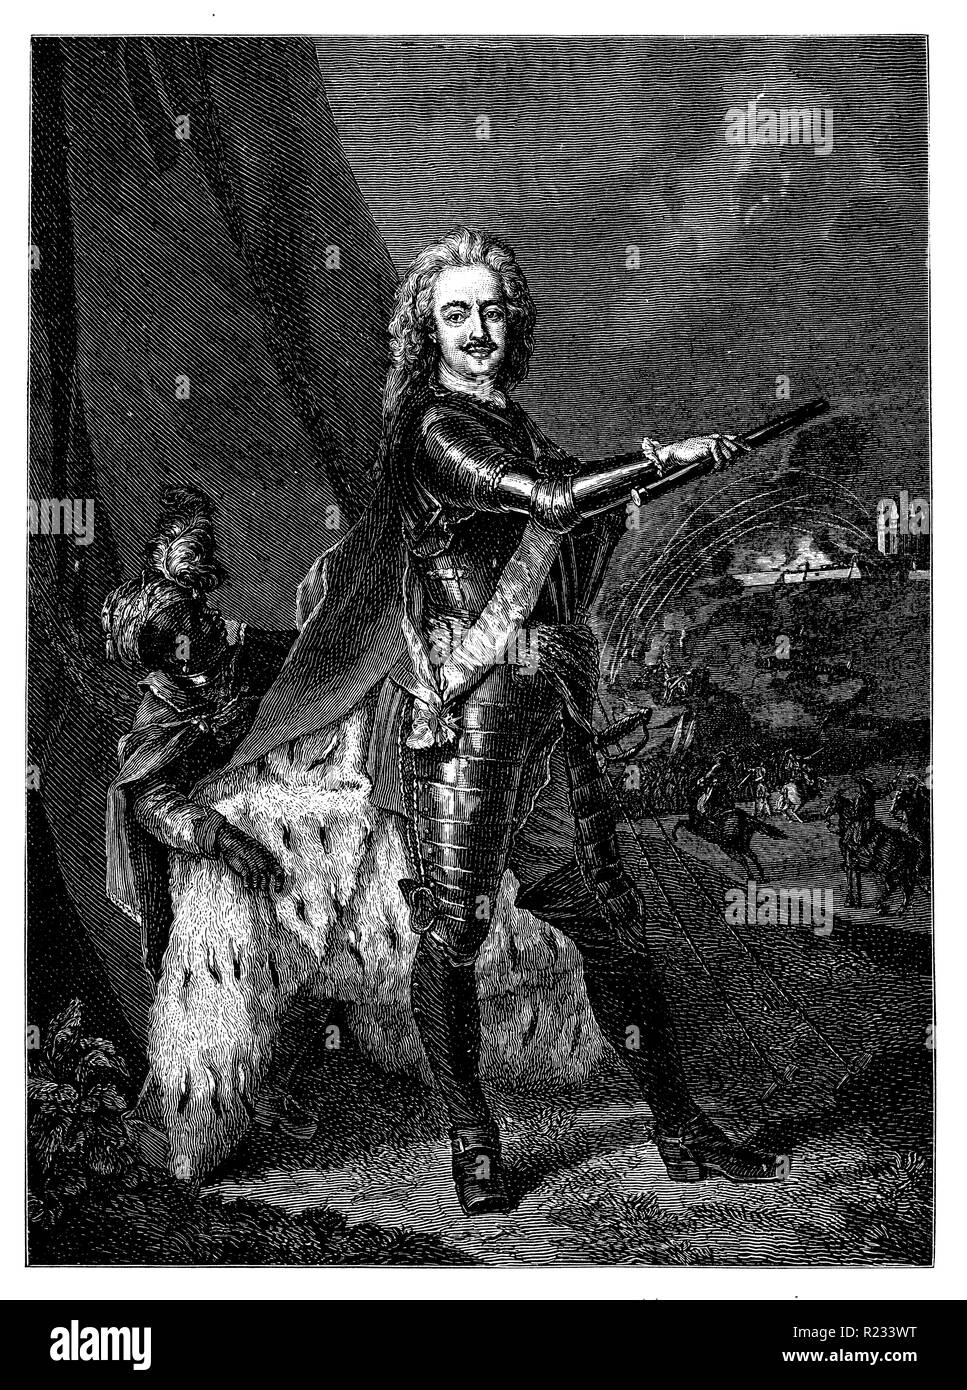 Leopold I, Prince of Anhalt-Dessau <1676-1747> called 'The Old Dessauer', German prince, lord of Anhalt-Dessau, Reichsgeneralfeldmarschall of the Holy Roman Empire, Prussian army reformer and field marshal, in the conquest of the small French fortress Aire, Stormed in 1710 by the Prussians. Youth portrait painted by Antoine Pesne, Antoine Pesne  1899 Stock Photo